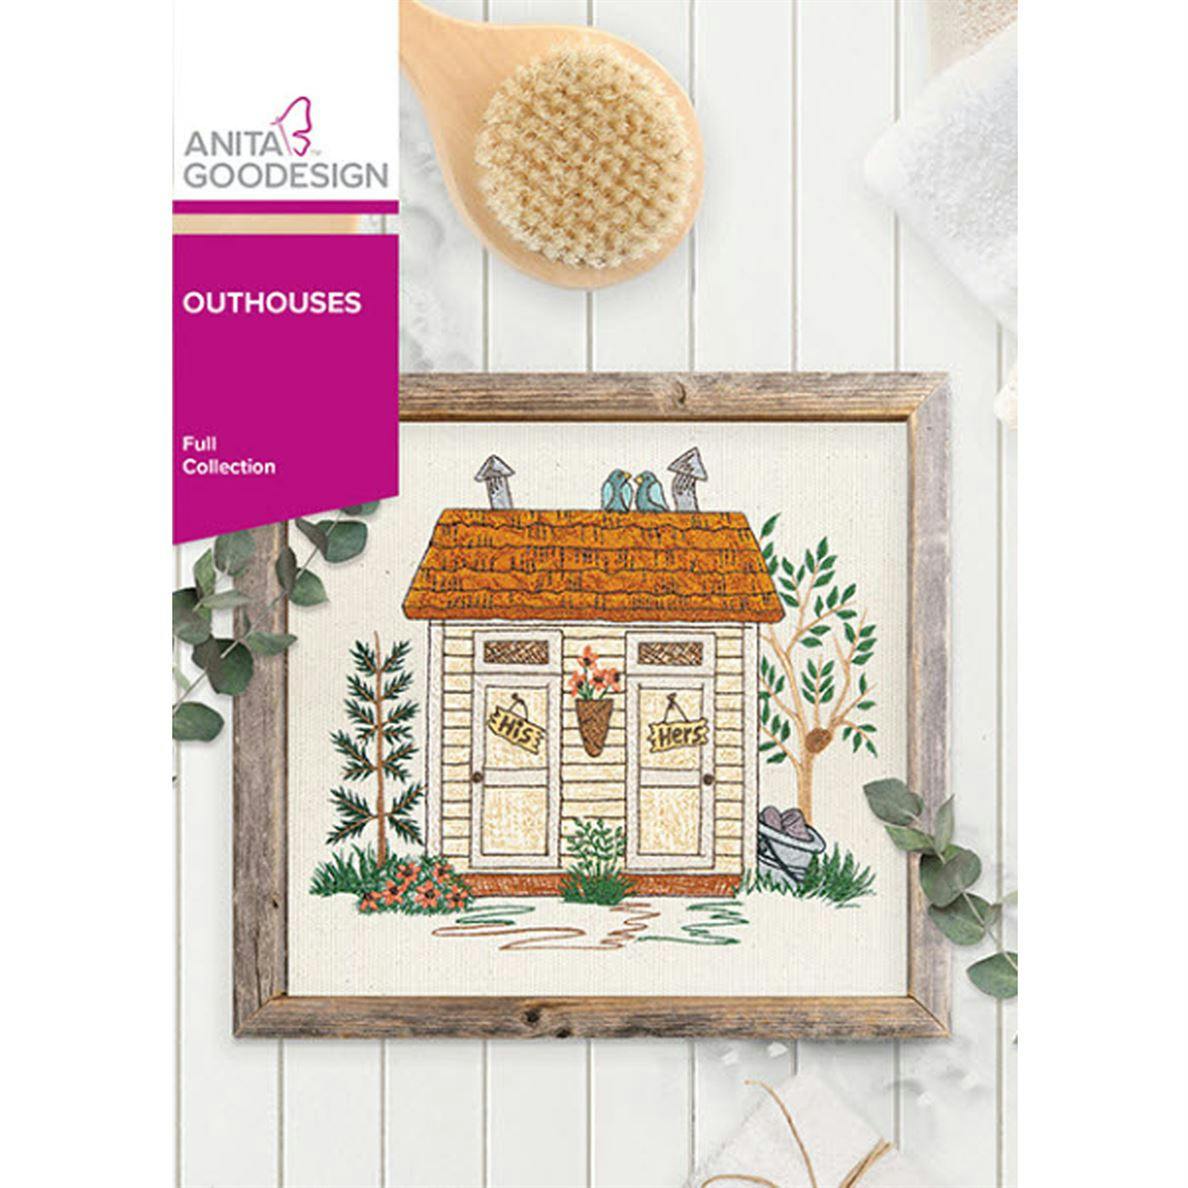 Cover of Outhouses embroidery design disc